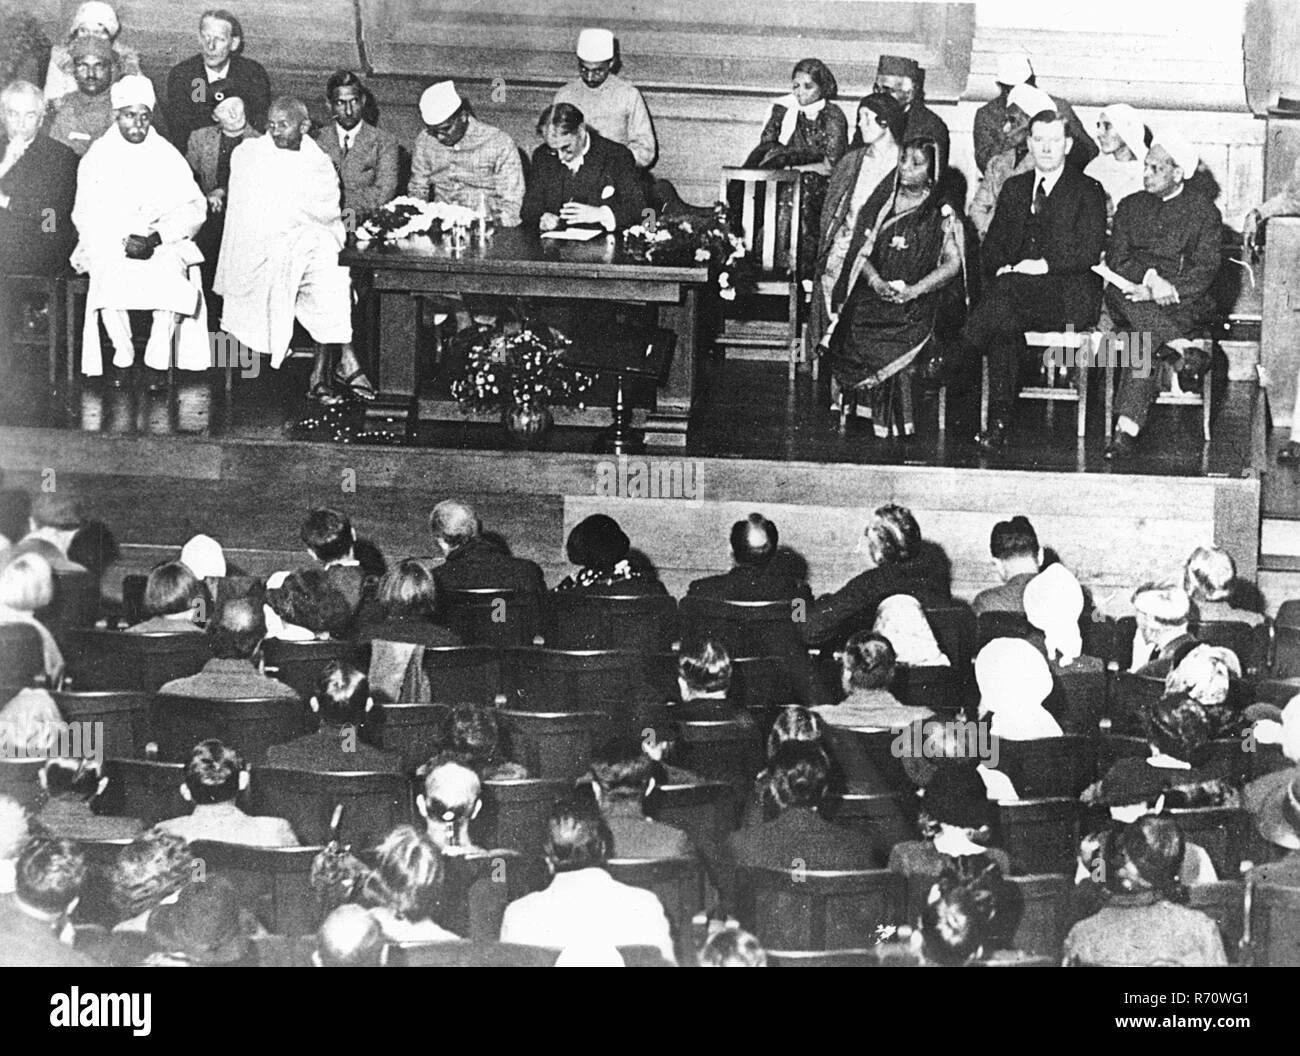 Reception given for Mahatma Gandhi at the Friends Meeting House, London, England, UK, September 12, 1931, old vintage 1900s picture Stock Photo